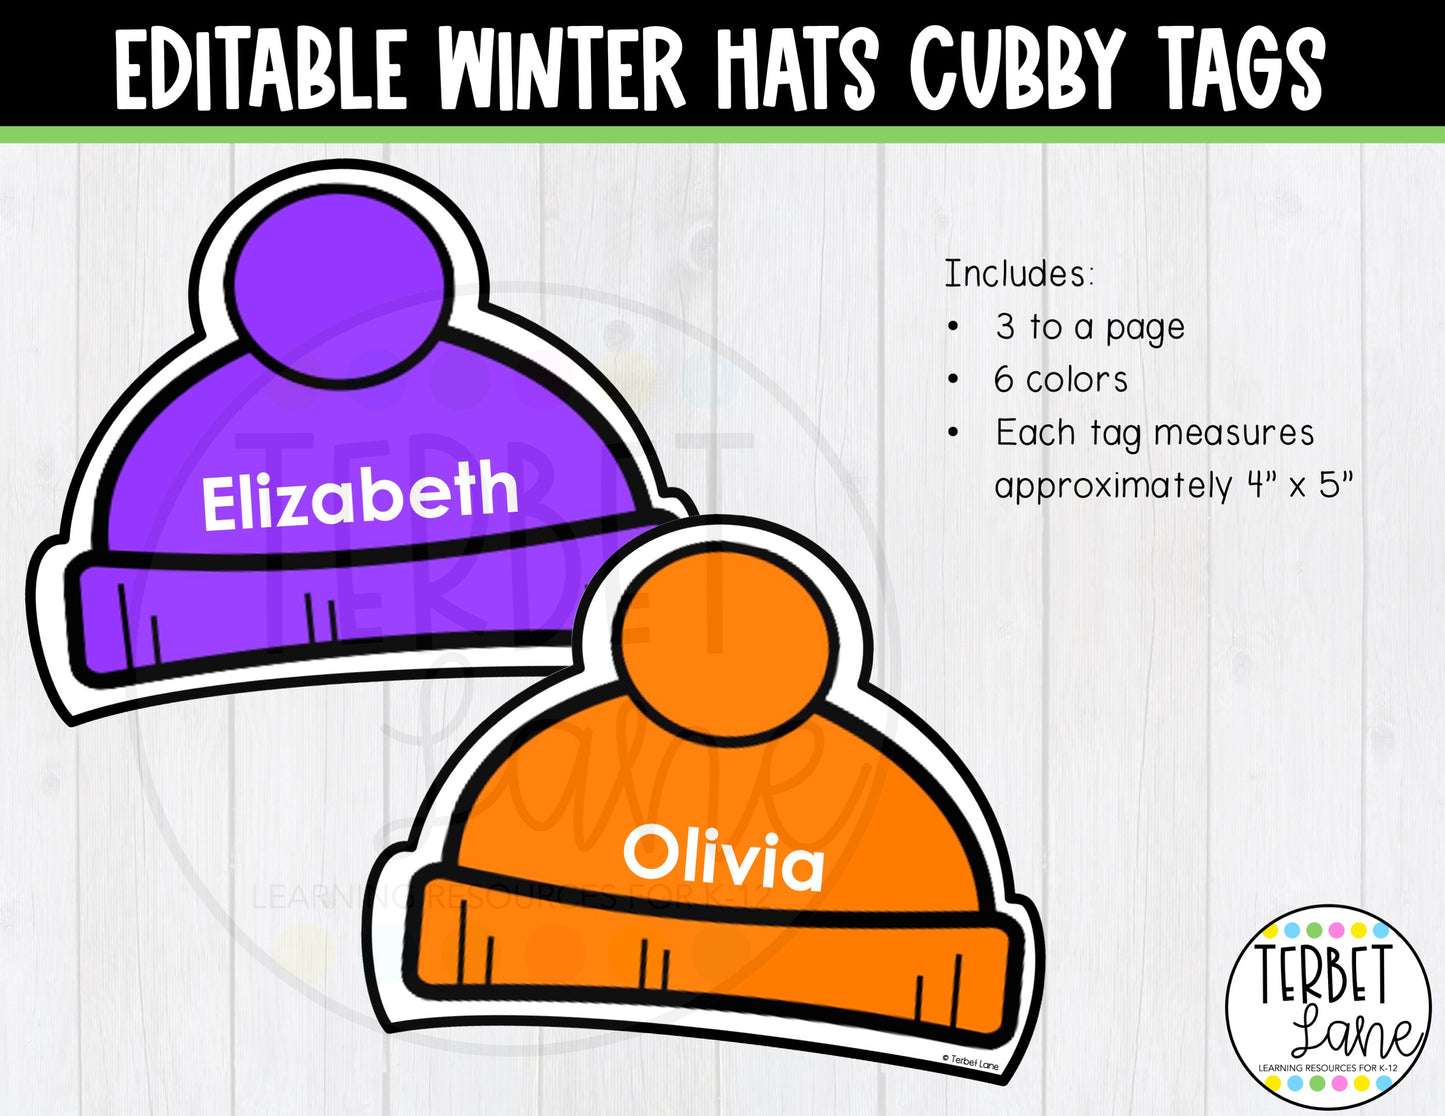 Editable Winter Hats Cubby Tags